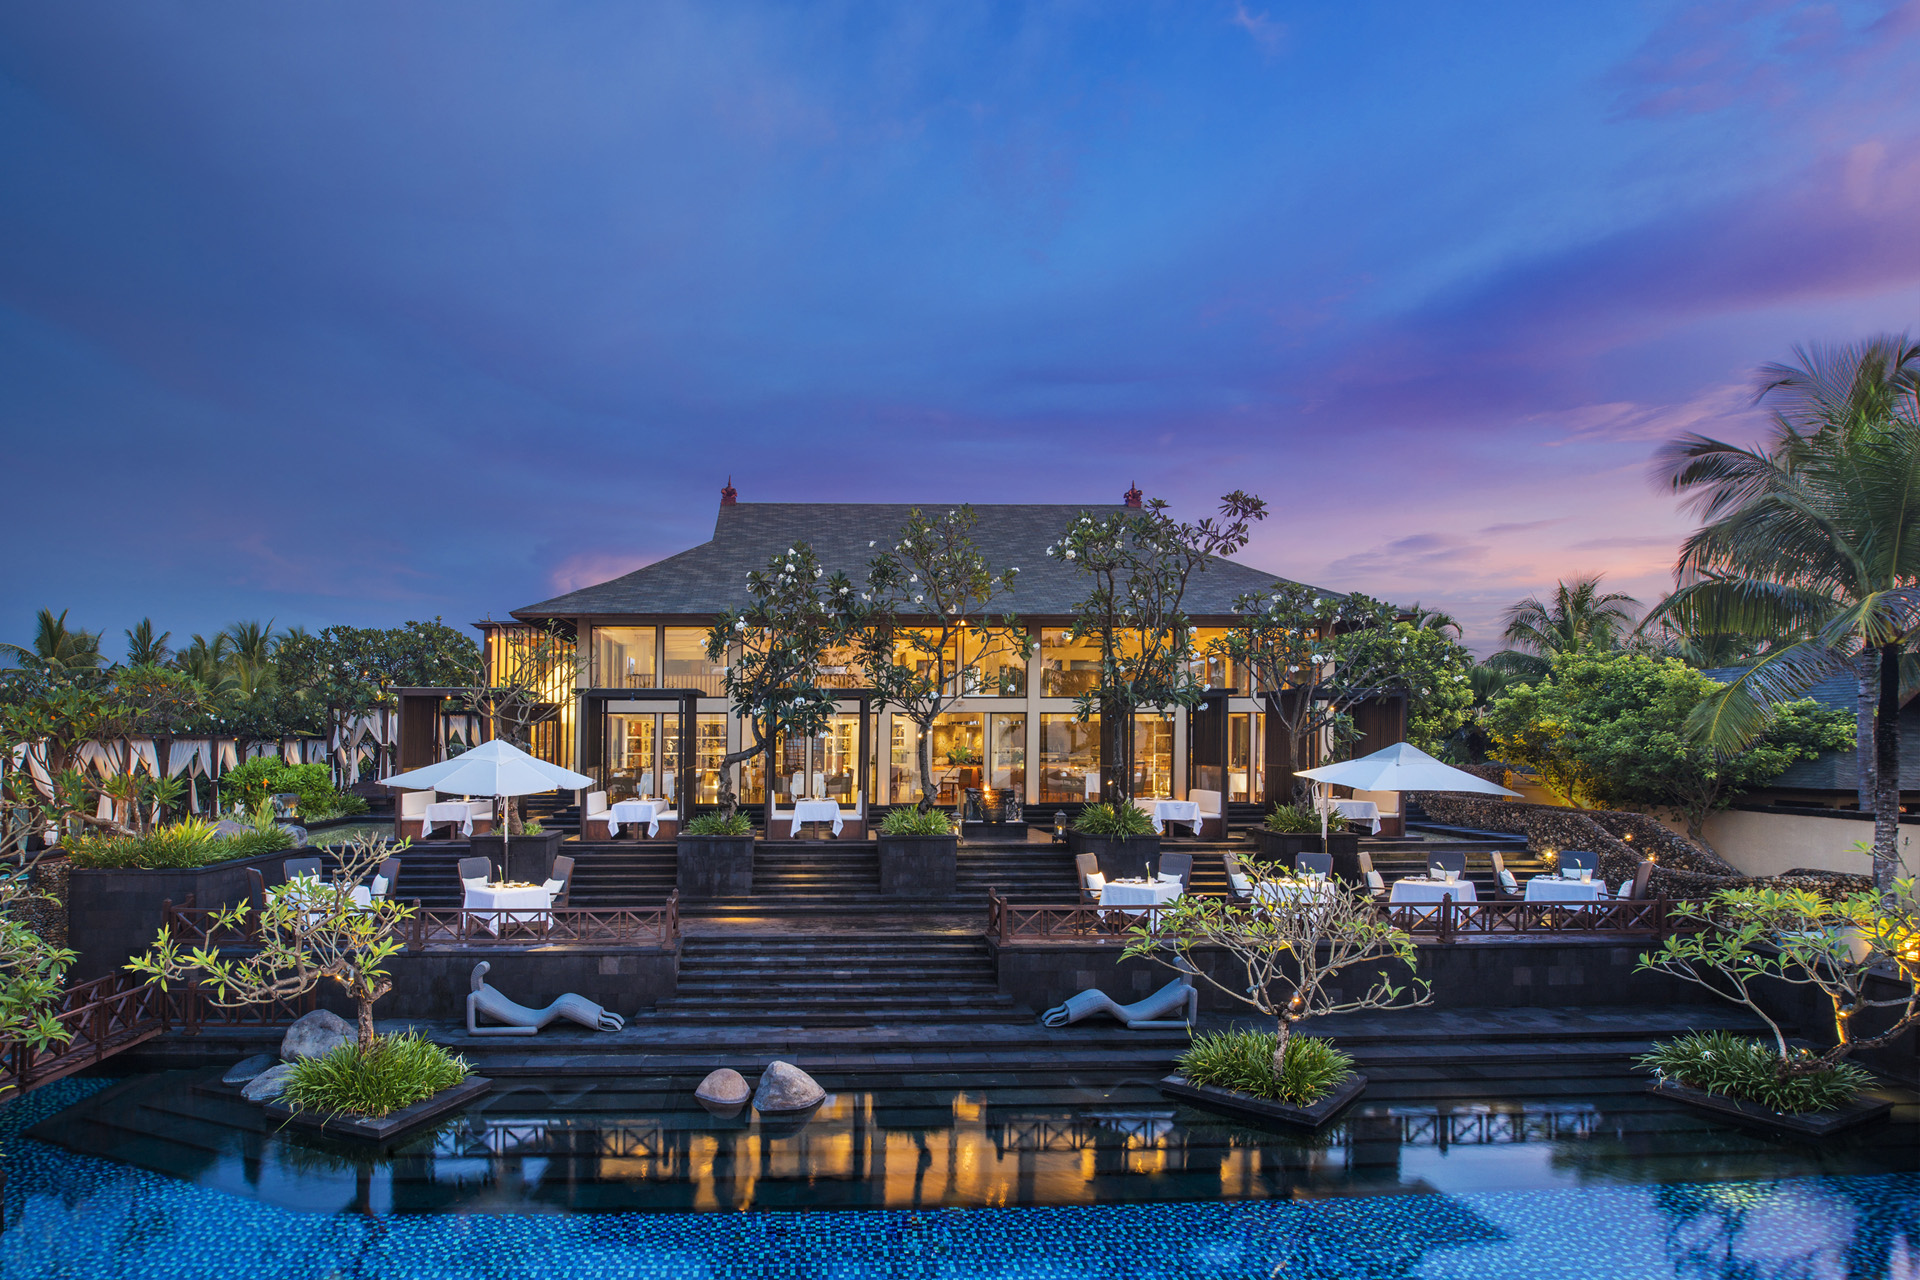 Savour your stay at the St Regis Bali Resort - The Occasional Traveller